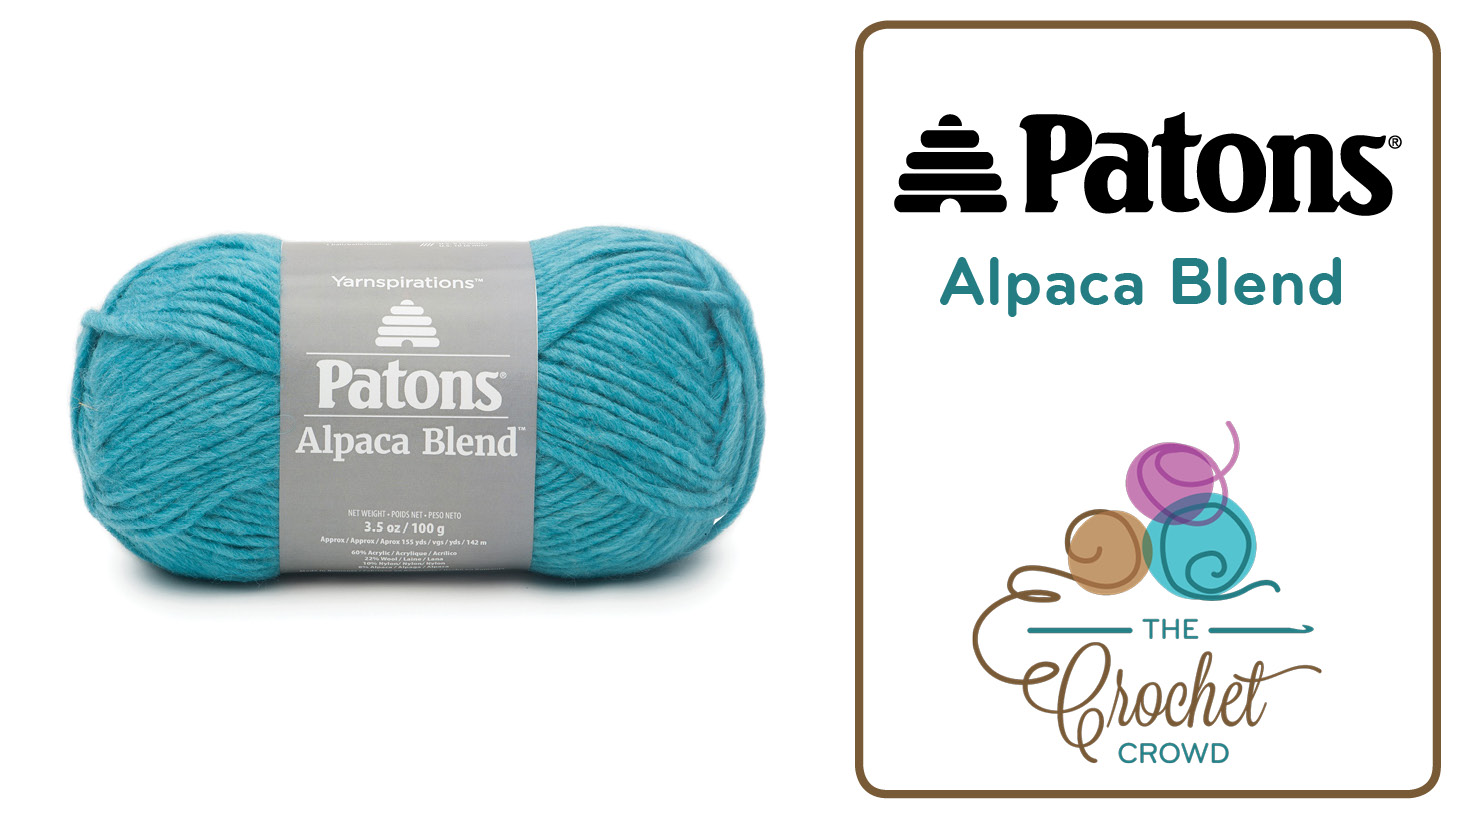 What To Do With Patons Alpaca Blend Yarn